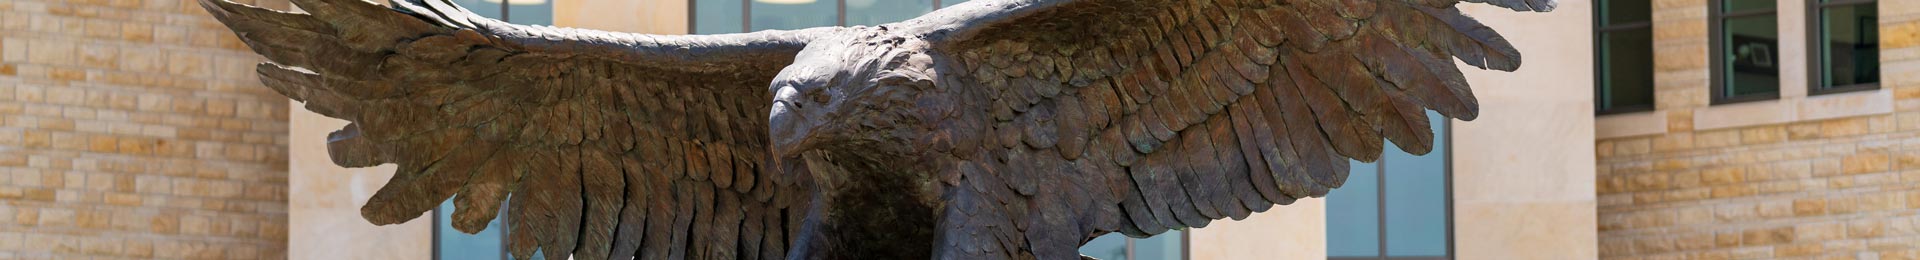 Photograph: eagle statue in front of Robert J. Dole Hall